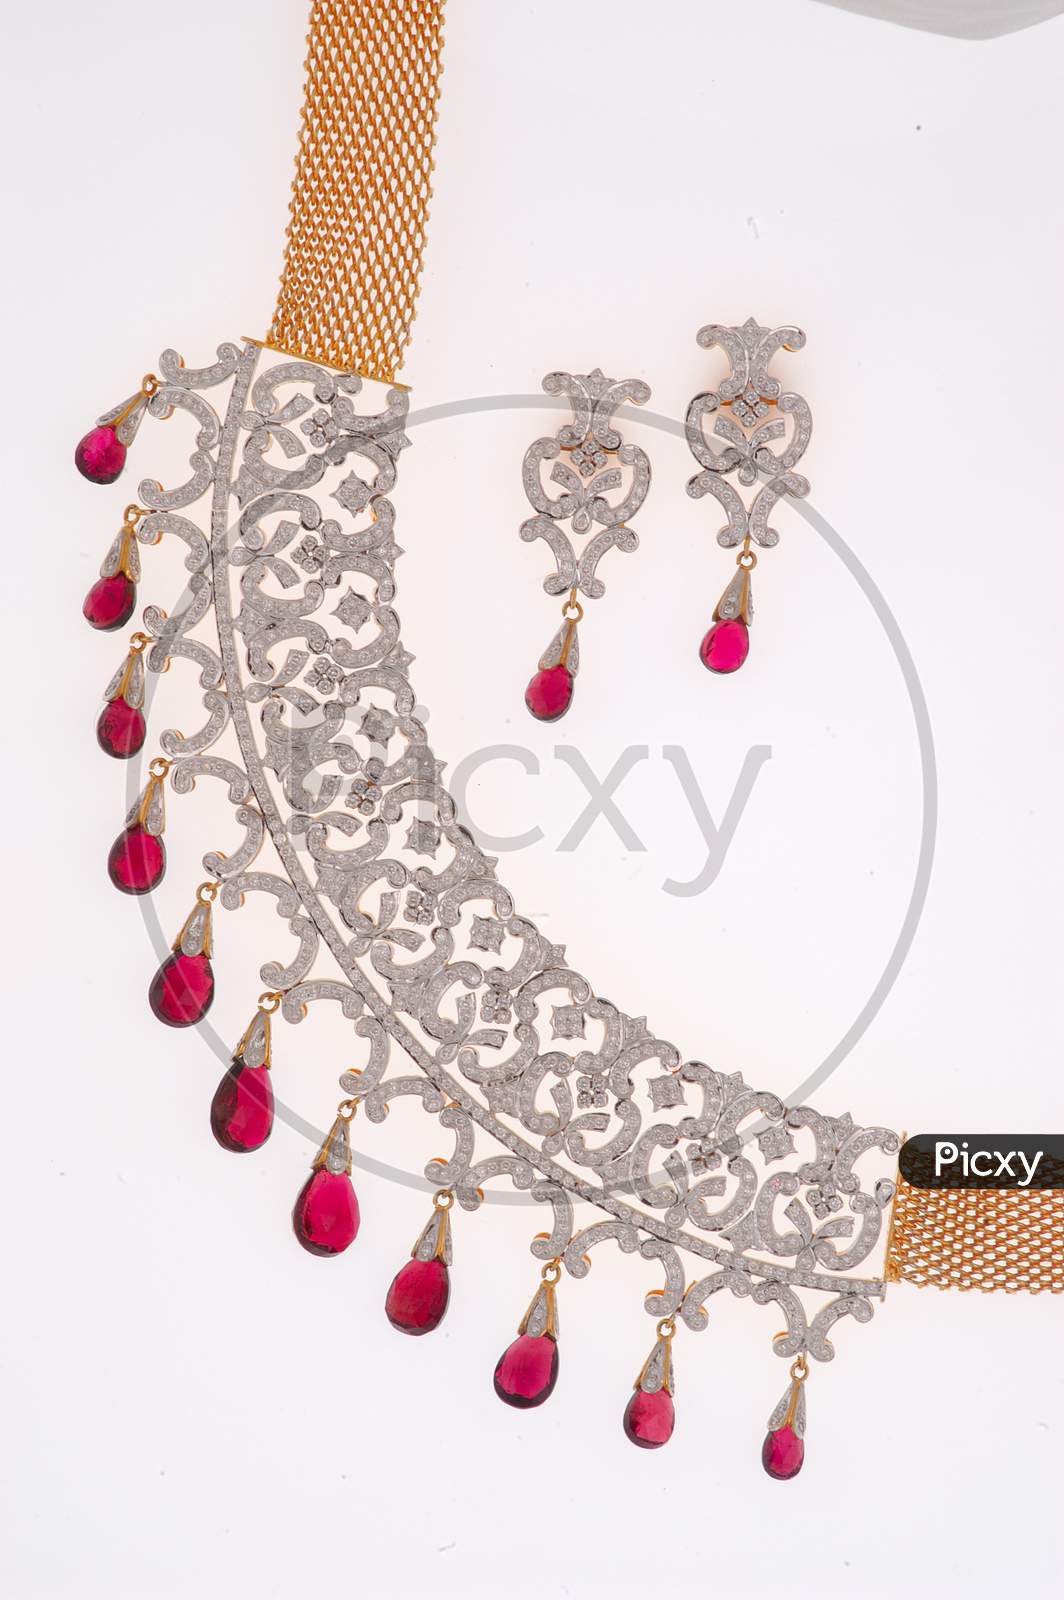 Diamond Necklace Jewelery With Ear Rings Over an Isolated White Background